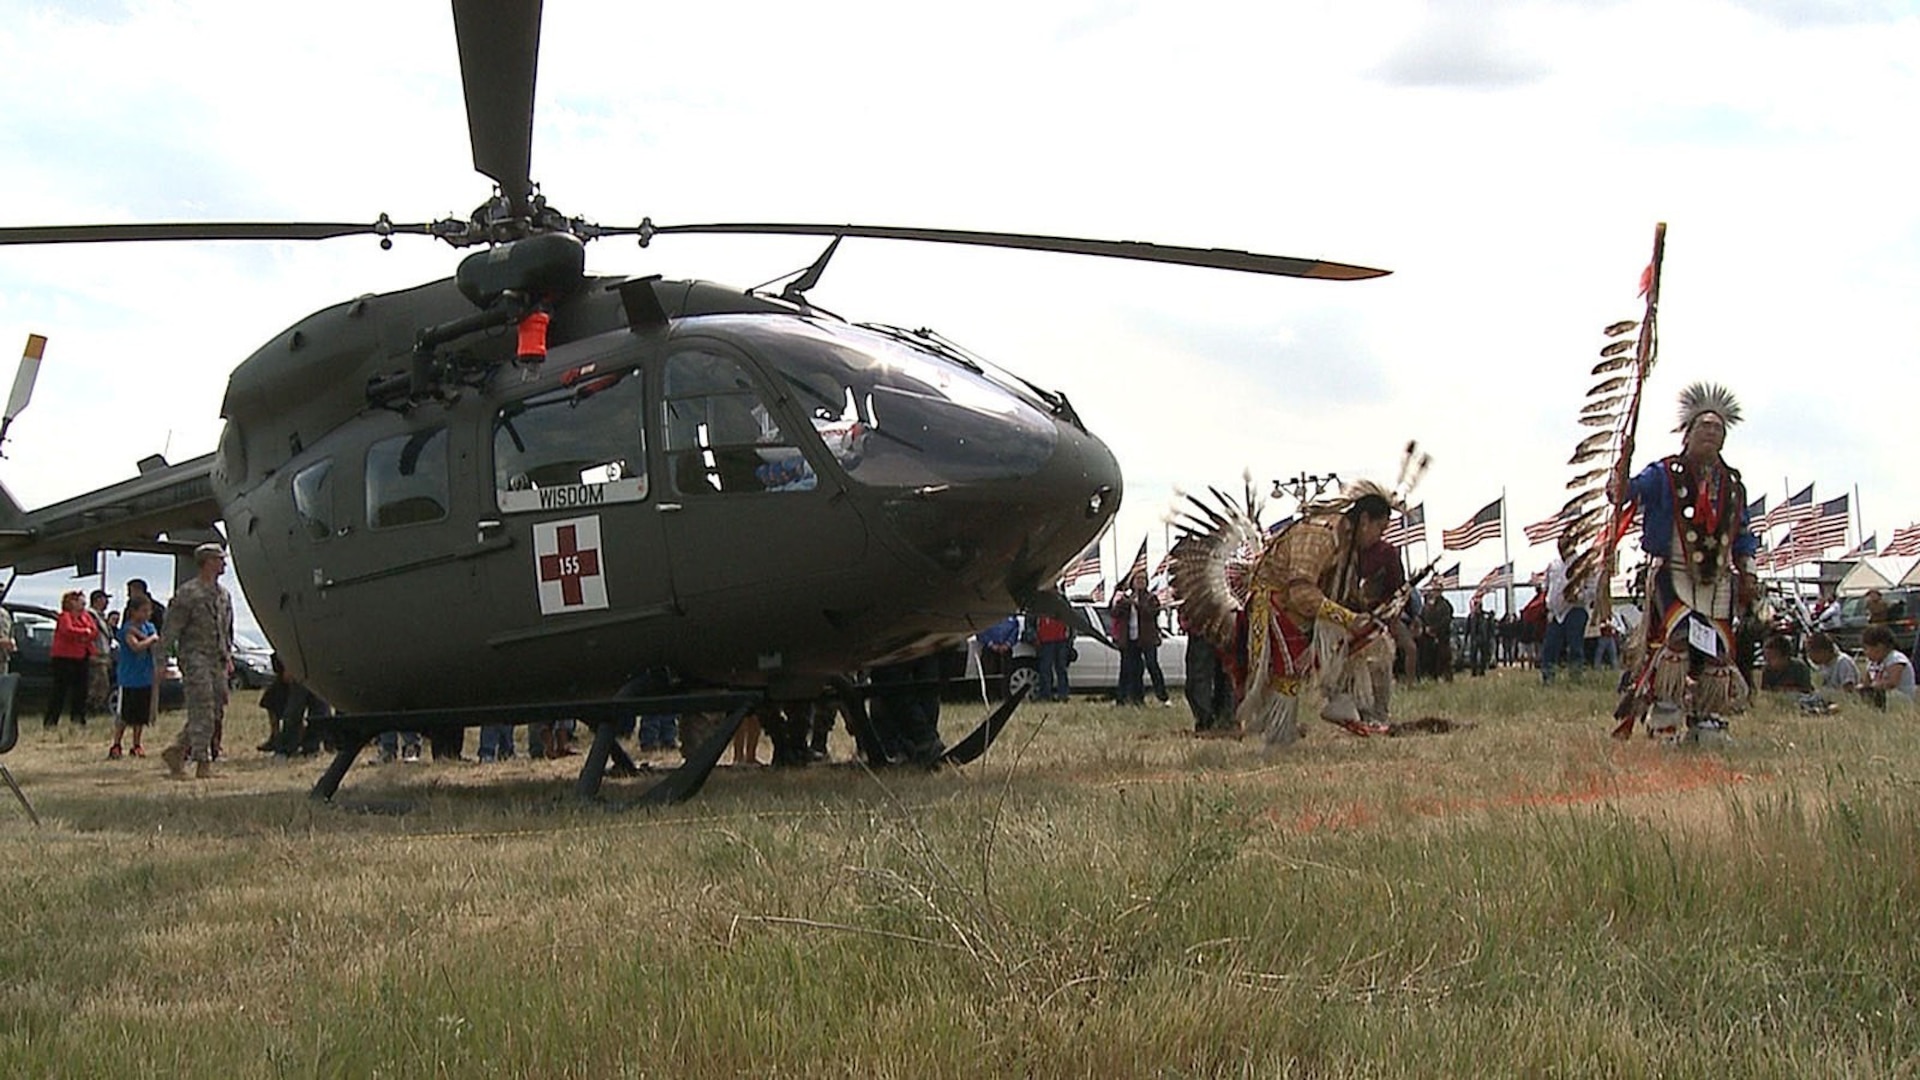 Two members of the Standing Rock Sioux Nation dance in traditional attire around a South Dakota Army National Guard UH 72 Lakota helicopter on June 10, 2012 after a blessing ceremony for the helicopter. The SDNG and the Lakota Nation have partnered together to support the people living on the reservations as well as to help inspire the youth to become active members of the community.